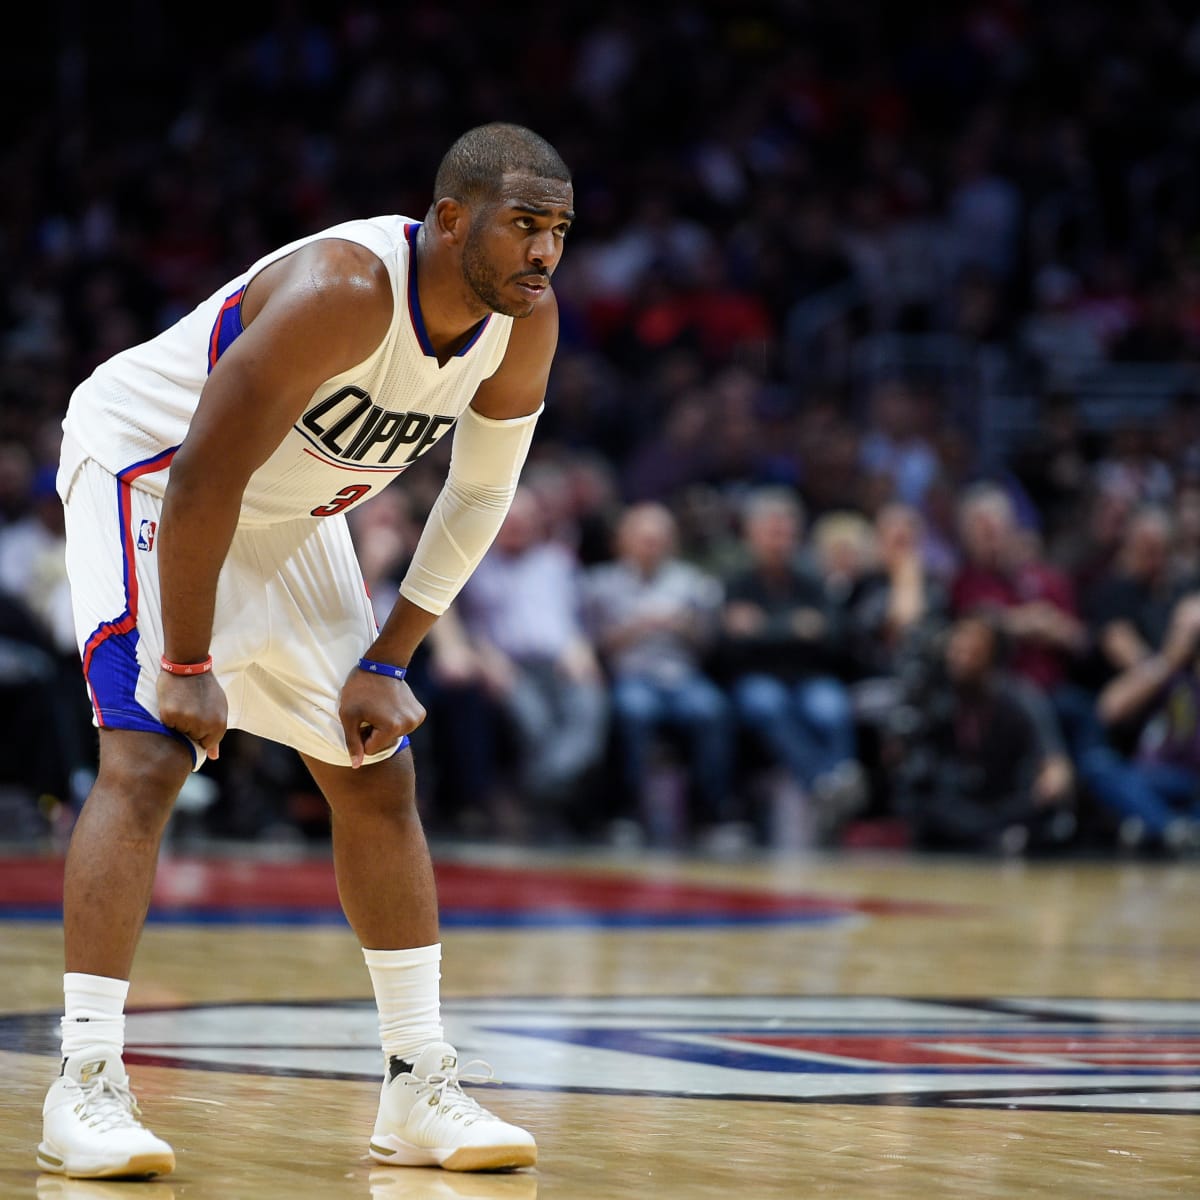 Have the Clippers Ruined Chris Paul's Playoff Momentum?